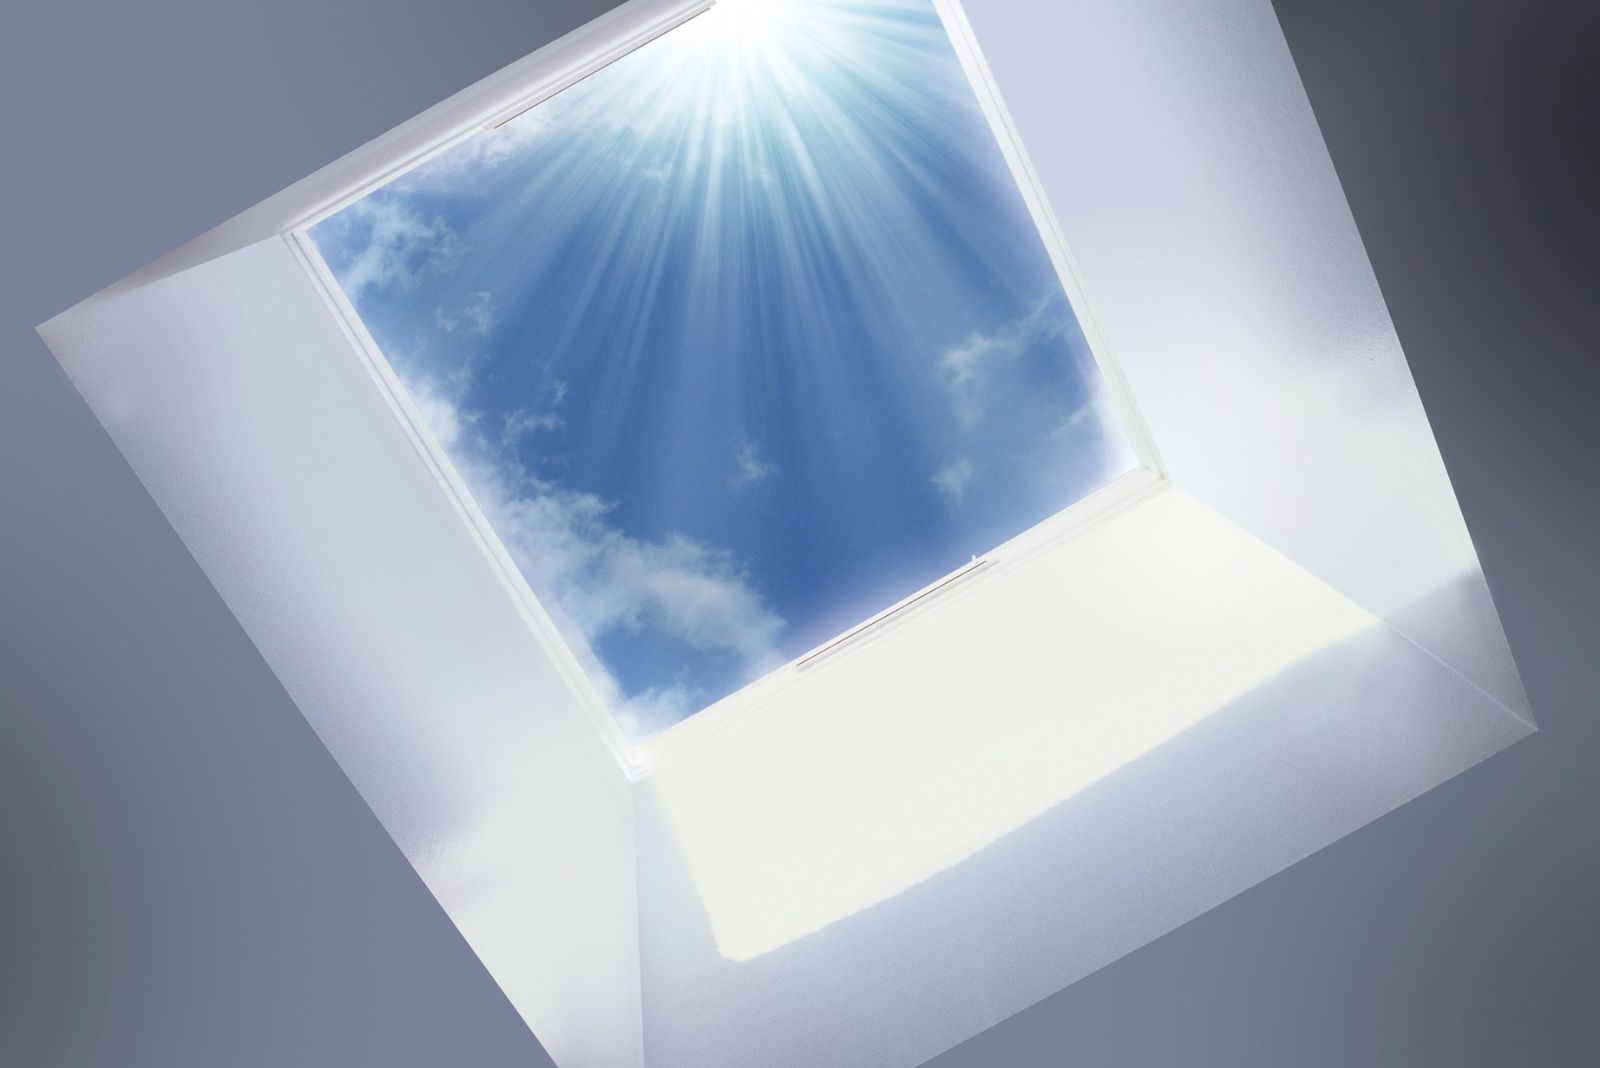 Electric Opening Skylight 800 x 1800mm